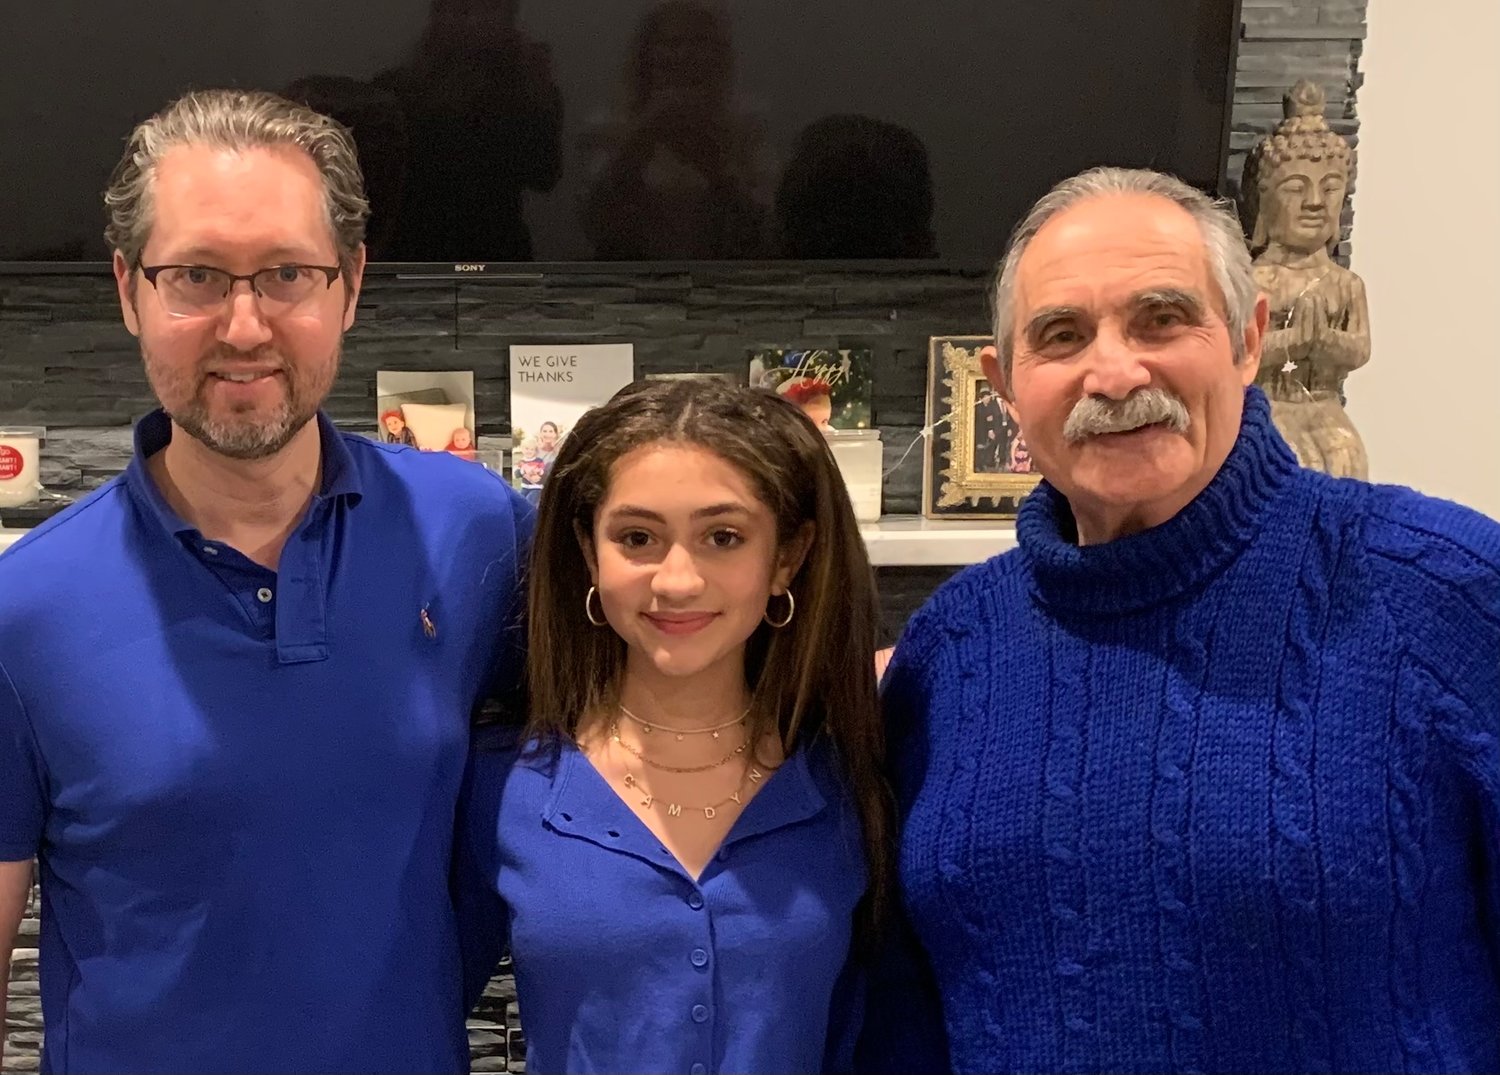 Joel Meirowitz, above right, in 2020 with his son, Sam Meirowitz, and granddaughter, Camdyn.